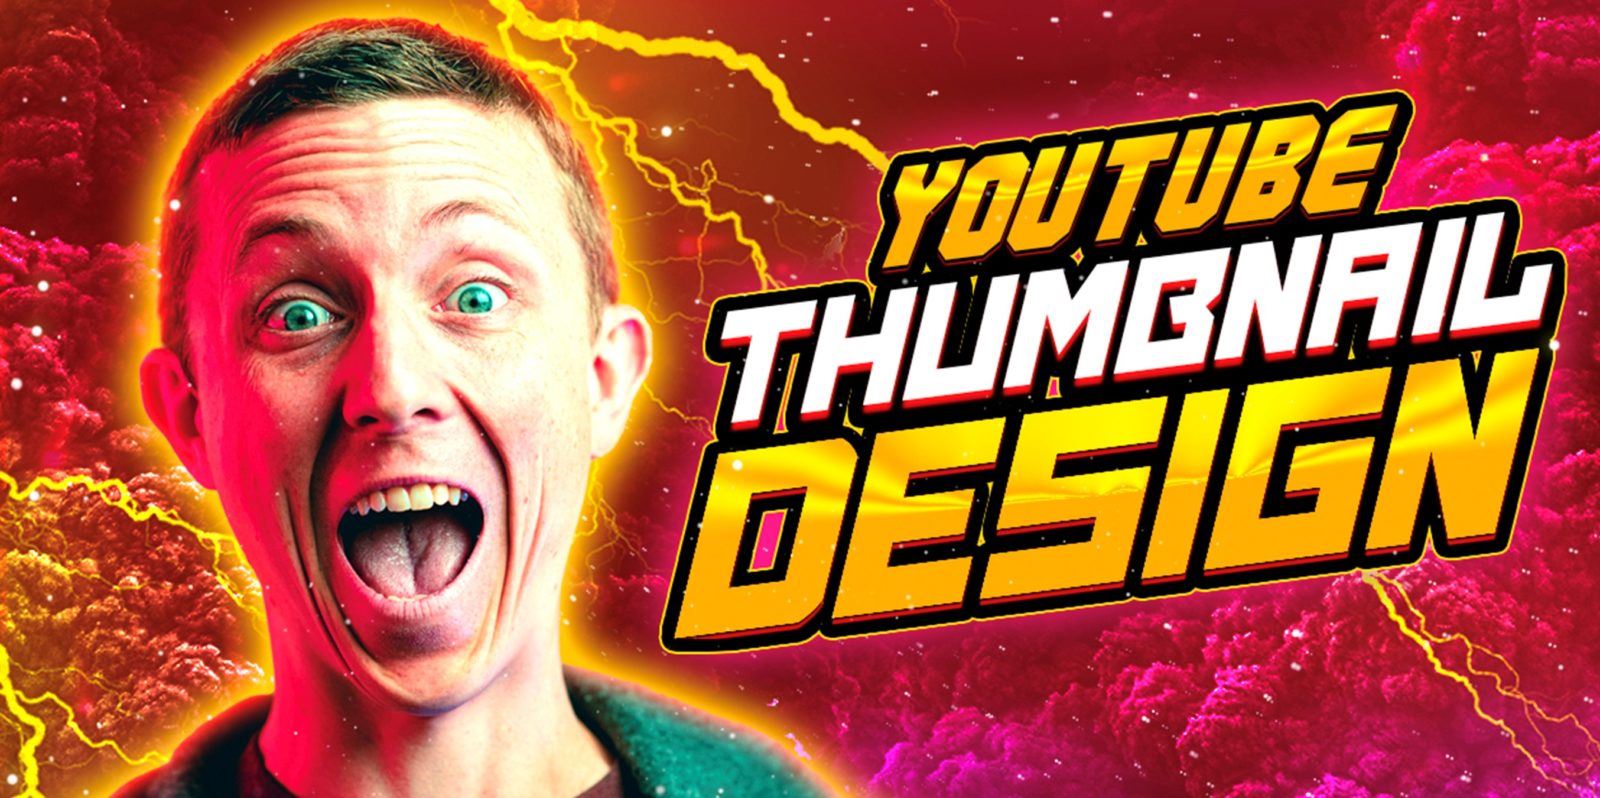 YouTube thumbnail example with edited text and a person that is shocked